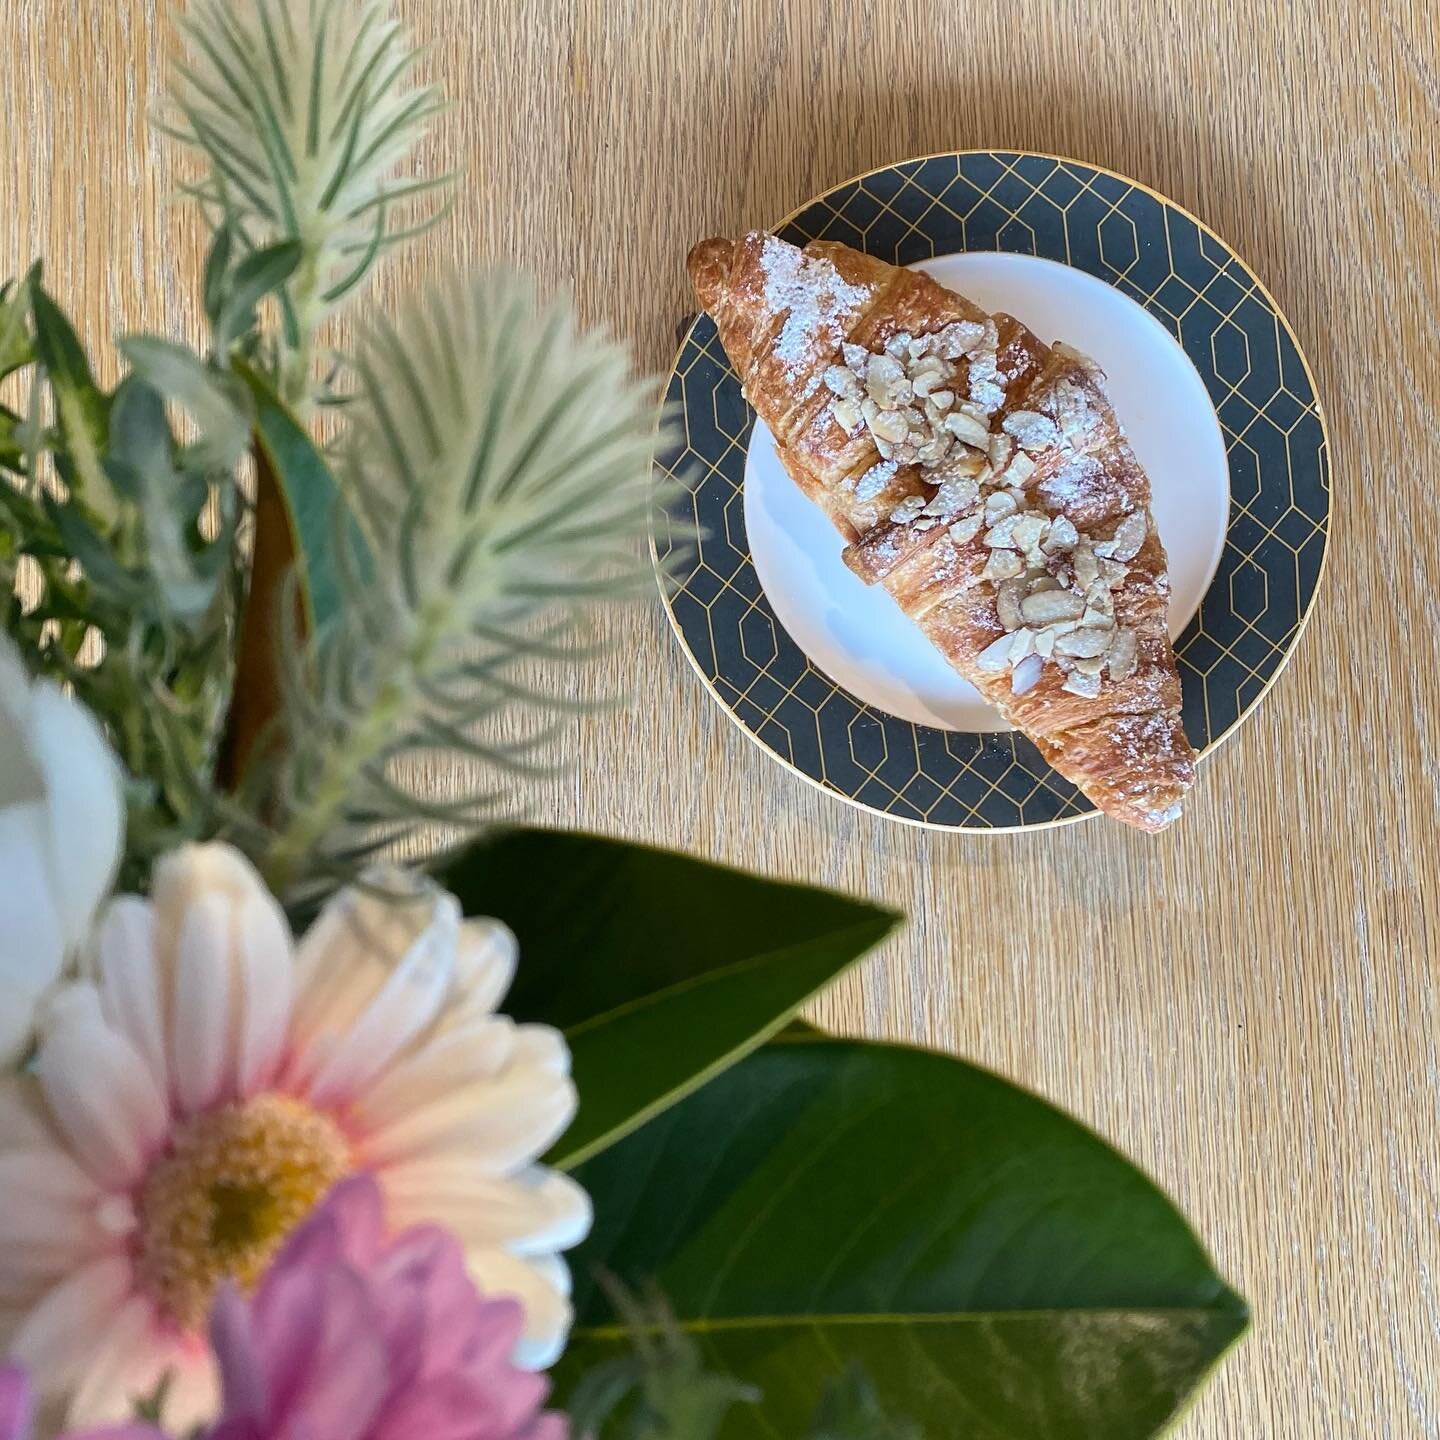 Croissant aux amandes 🥐

#almondcroissant #croissants #frenchpastry #frenchpastries #breakfast #delicious #foodgasm #foodies #tasty 
#eat #eeeeeats #cake #gourmandise #patisserie #food #foodie #instafood #yummy #instagood #love
#wellingtoneat #welli